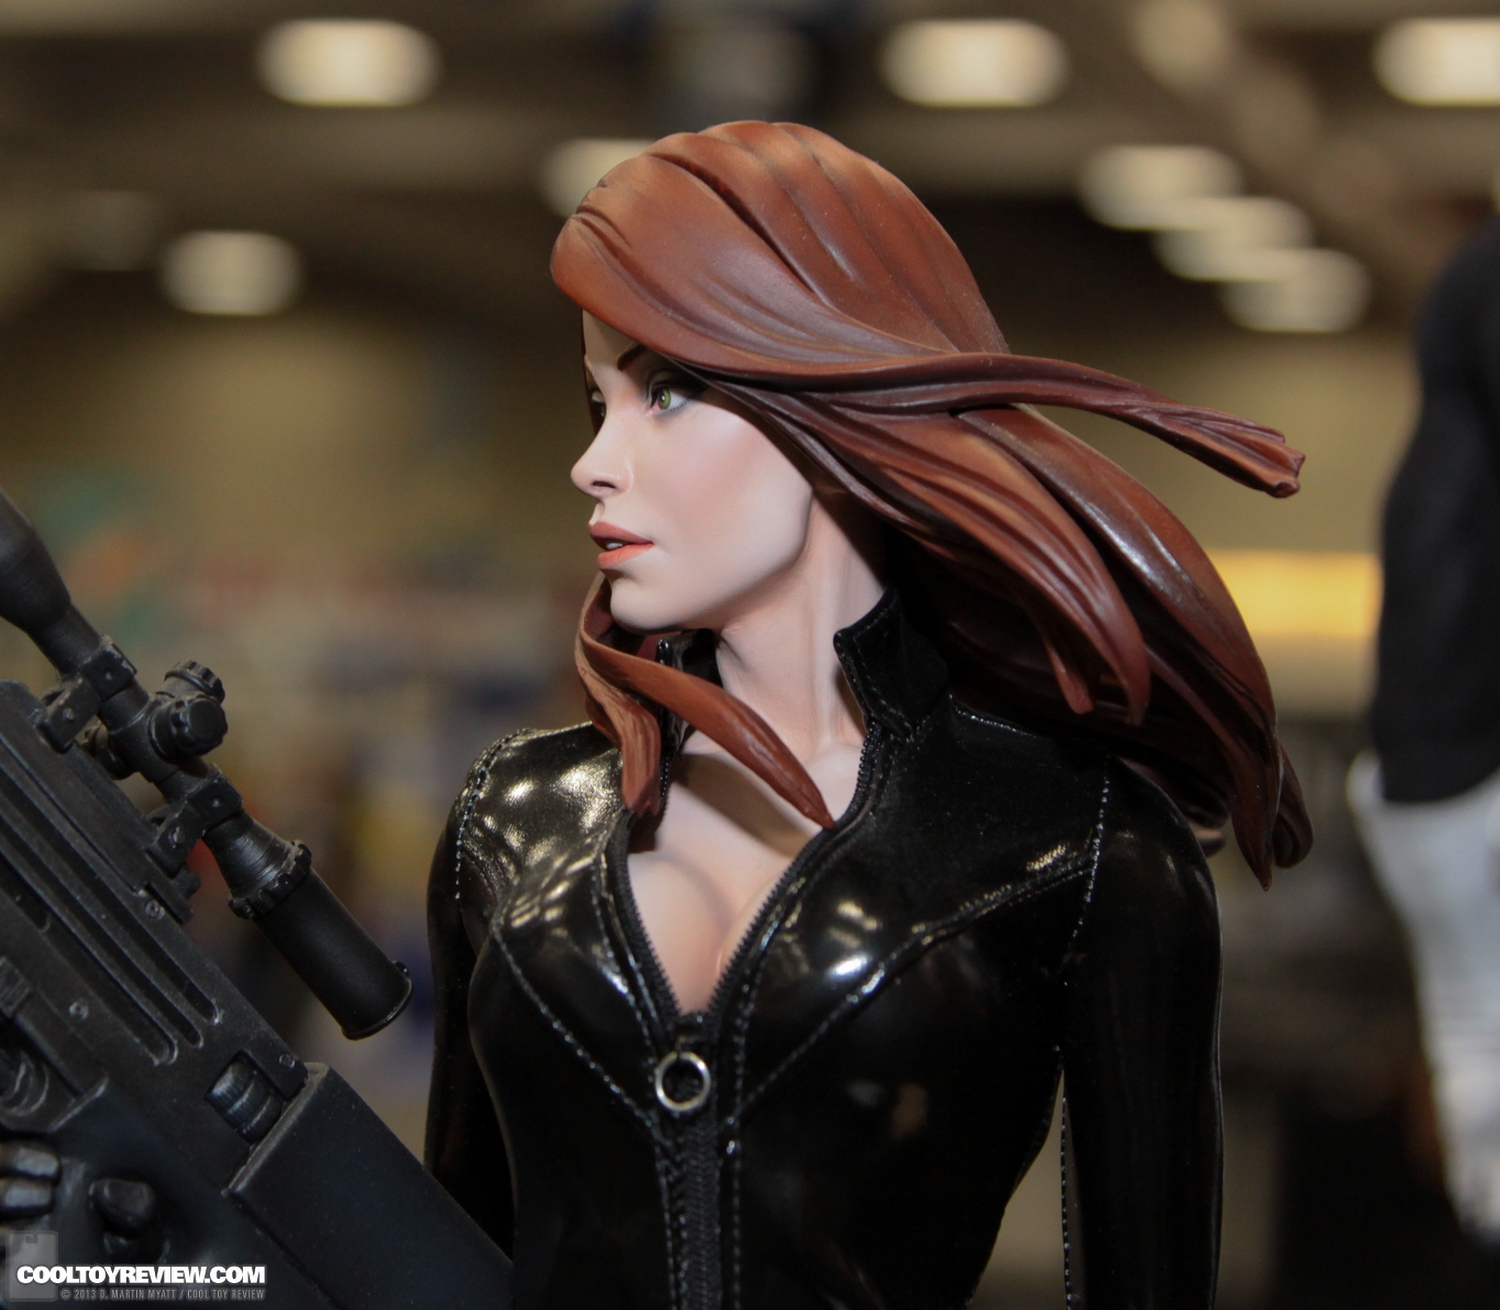 SDCC_2013_Sideshow_Collectibles_Thursday-141.jpg